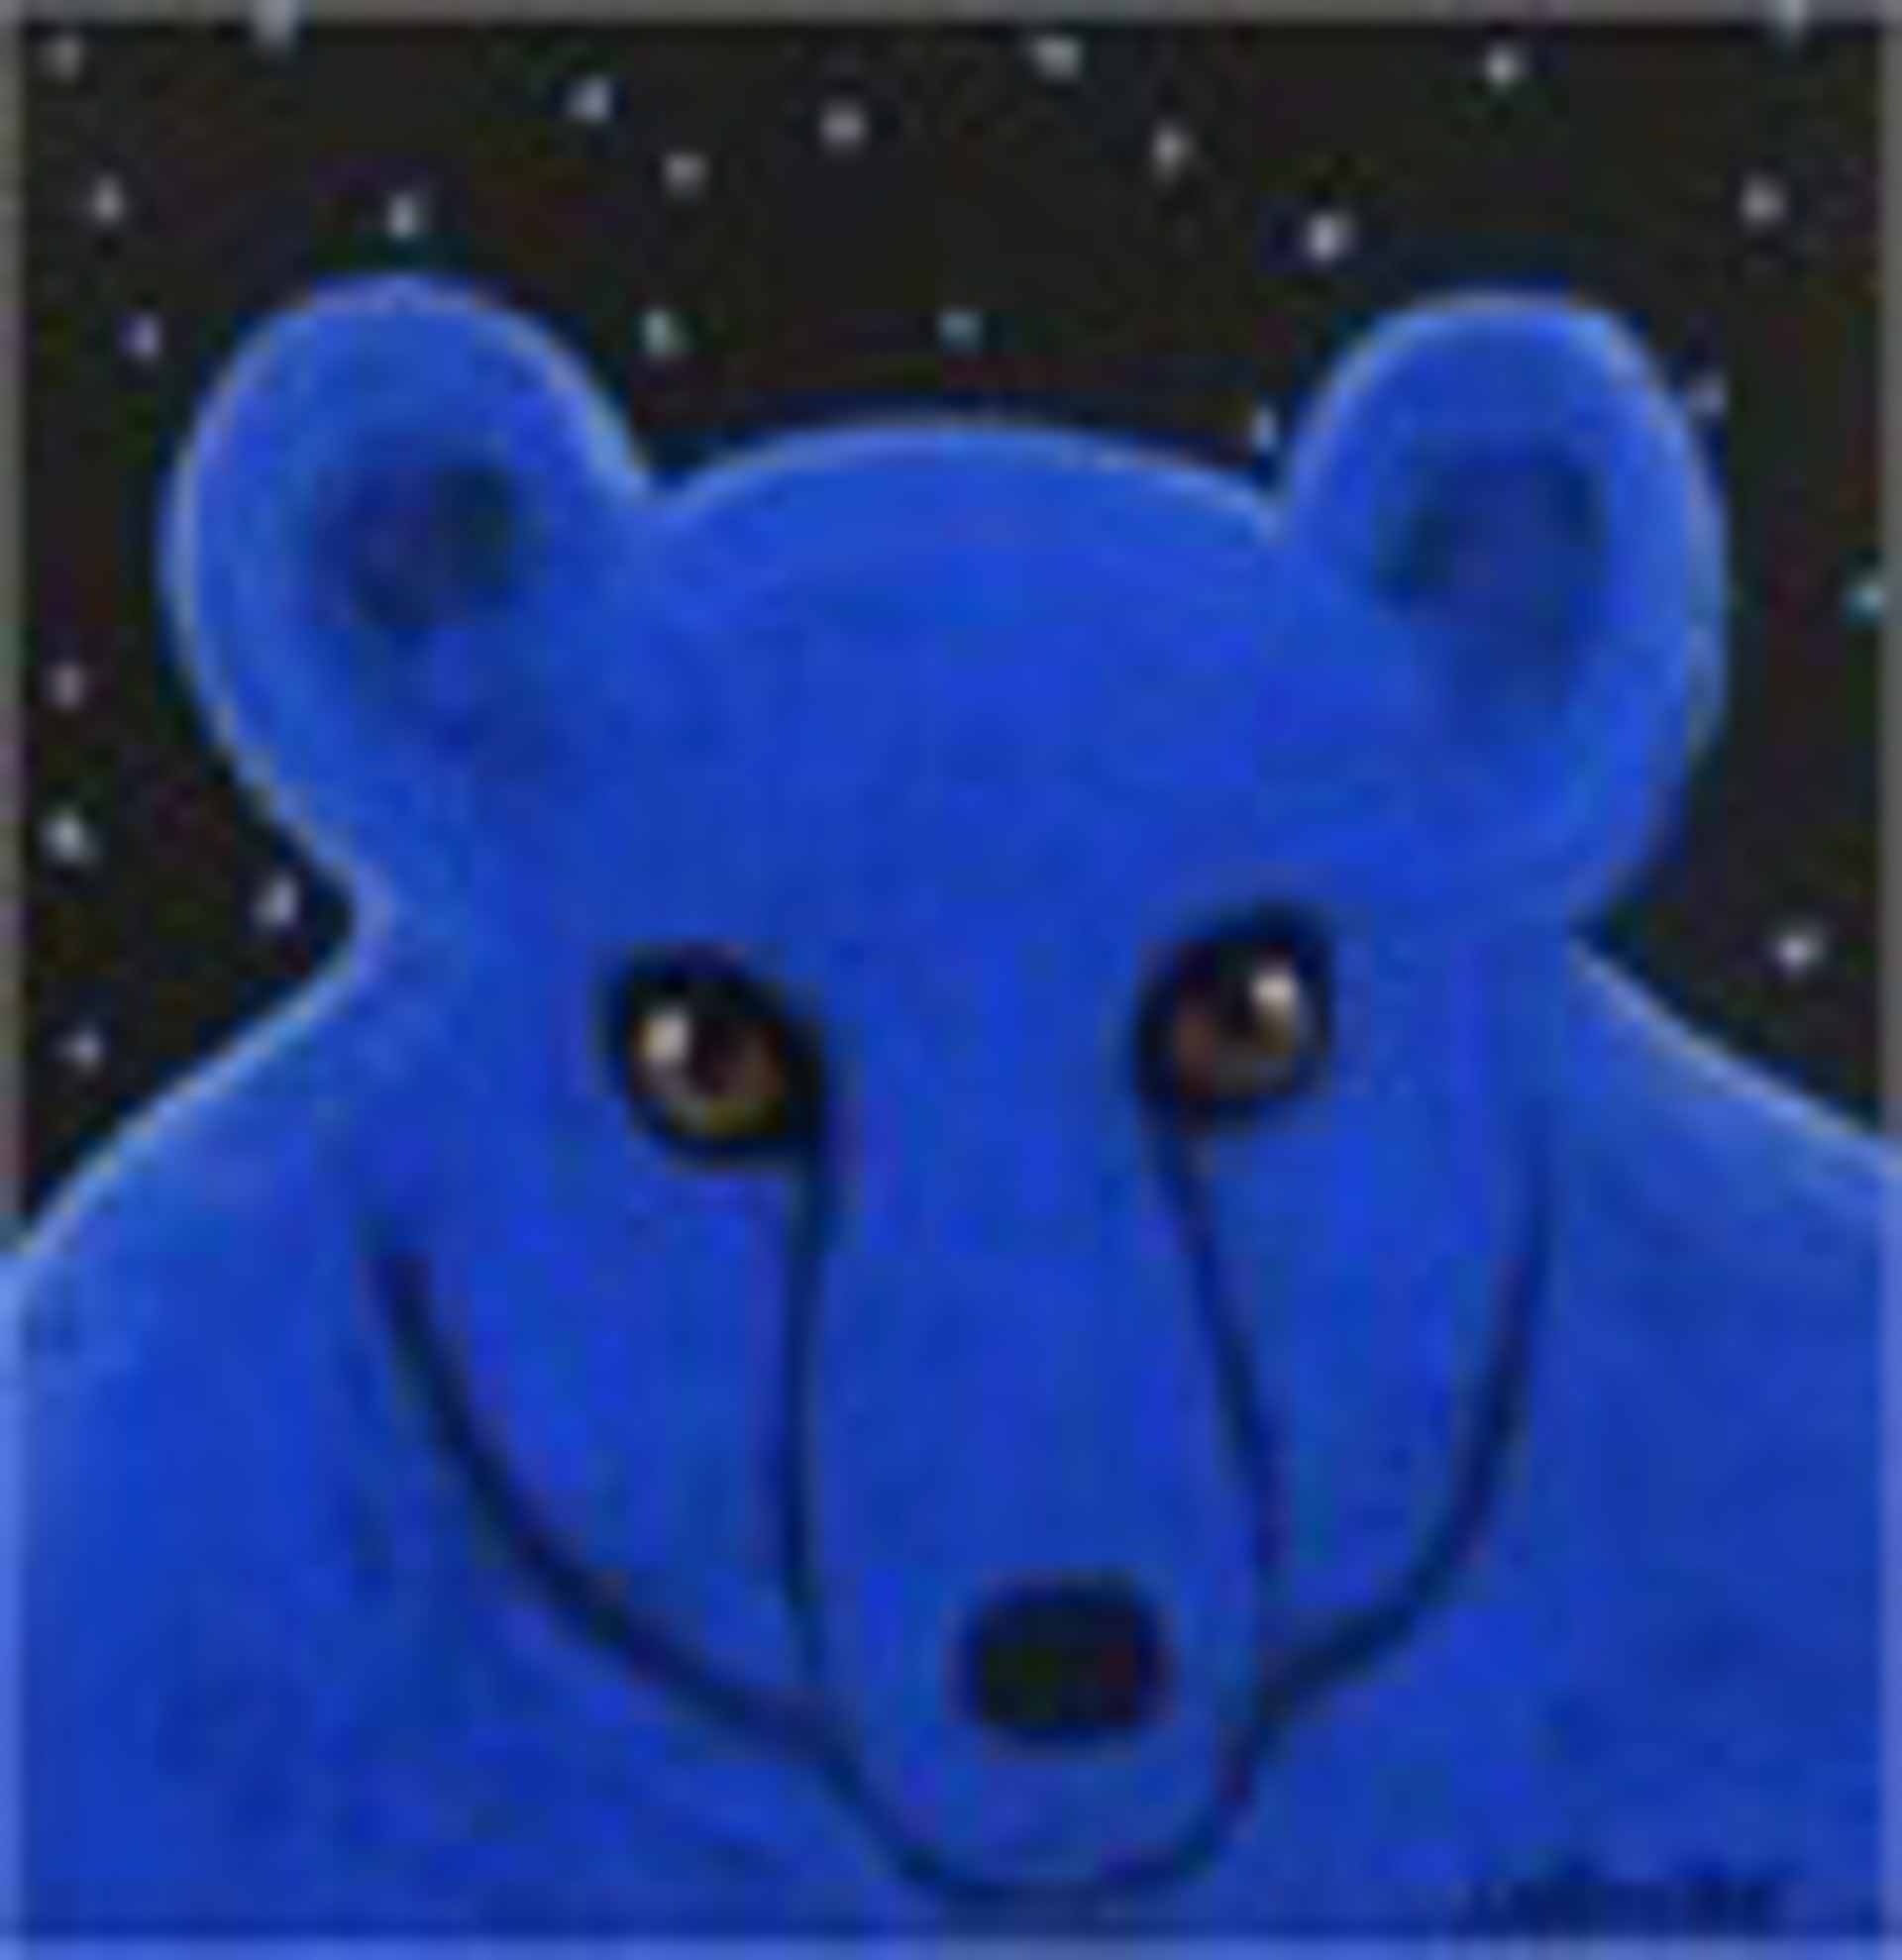 BABY BLUE limited edition framed $1500 by Carole LaRoche